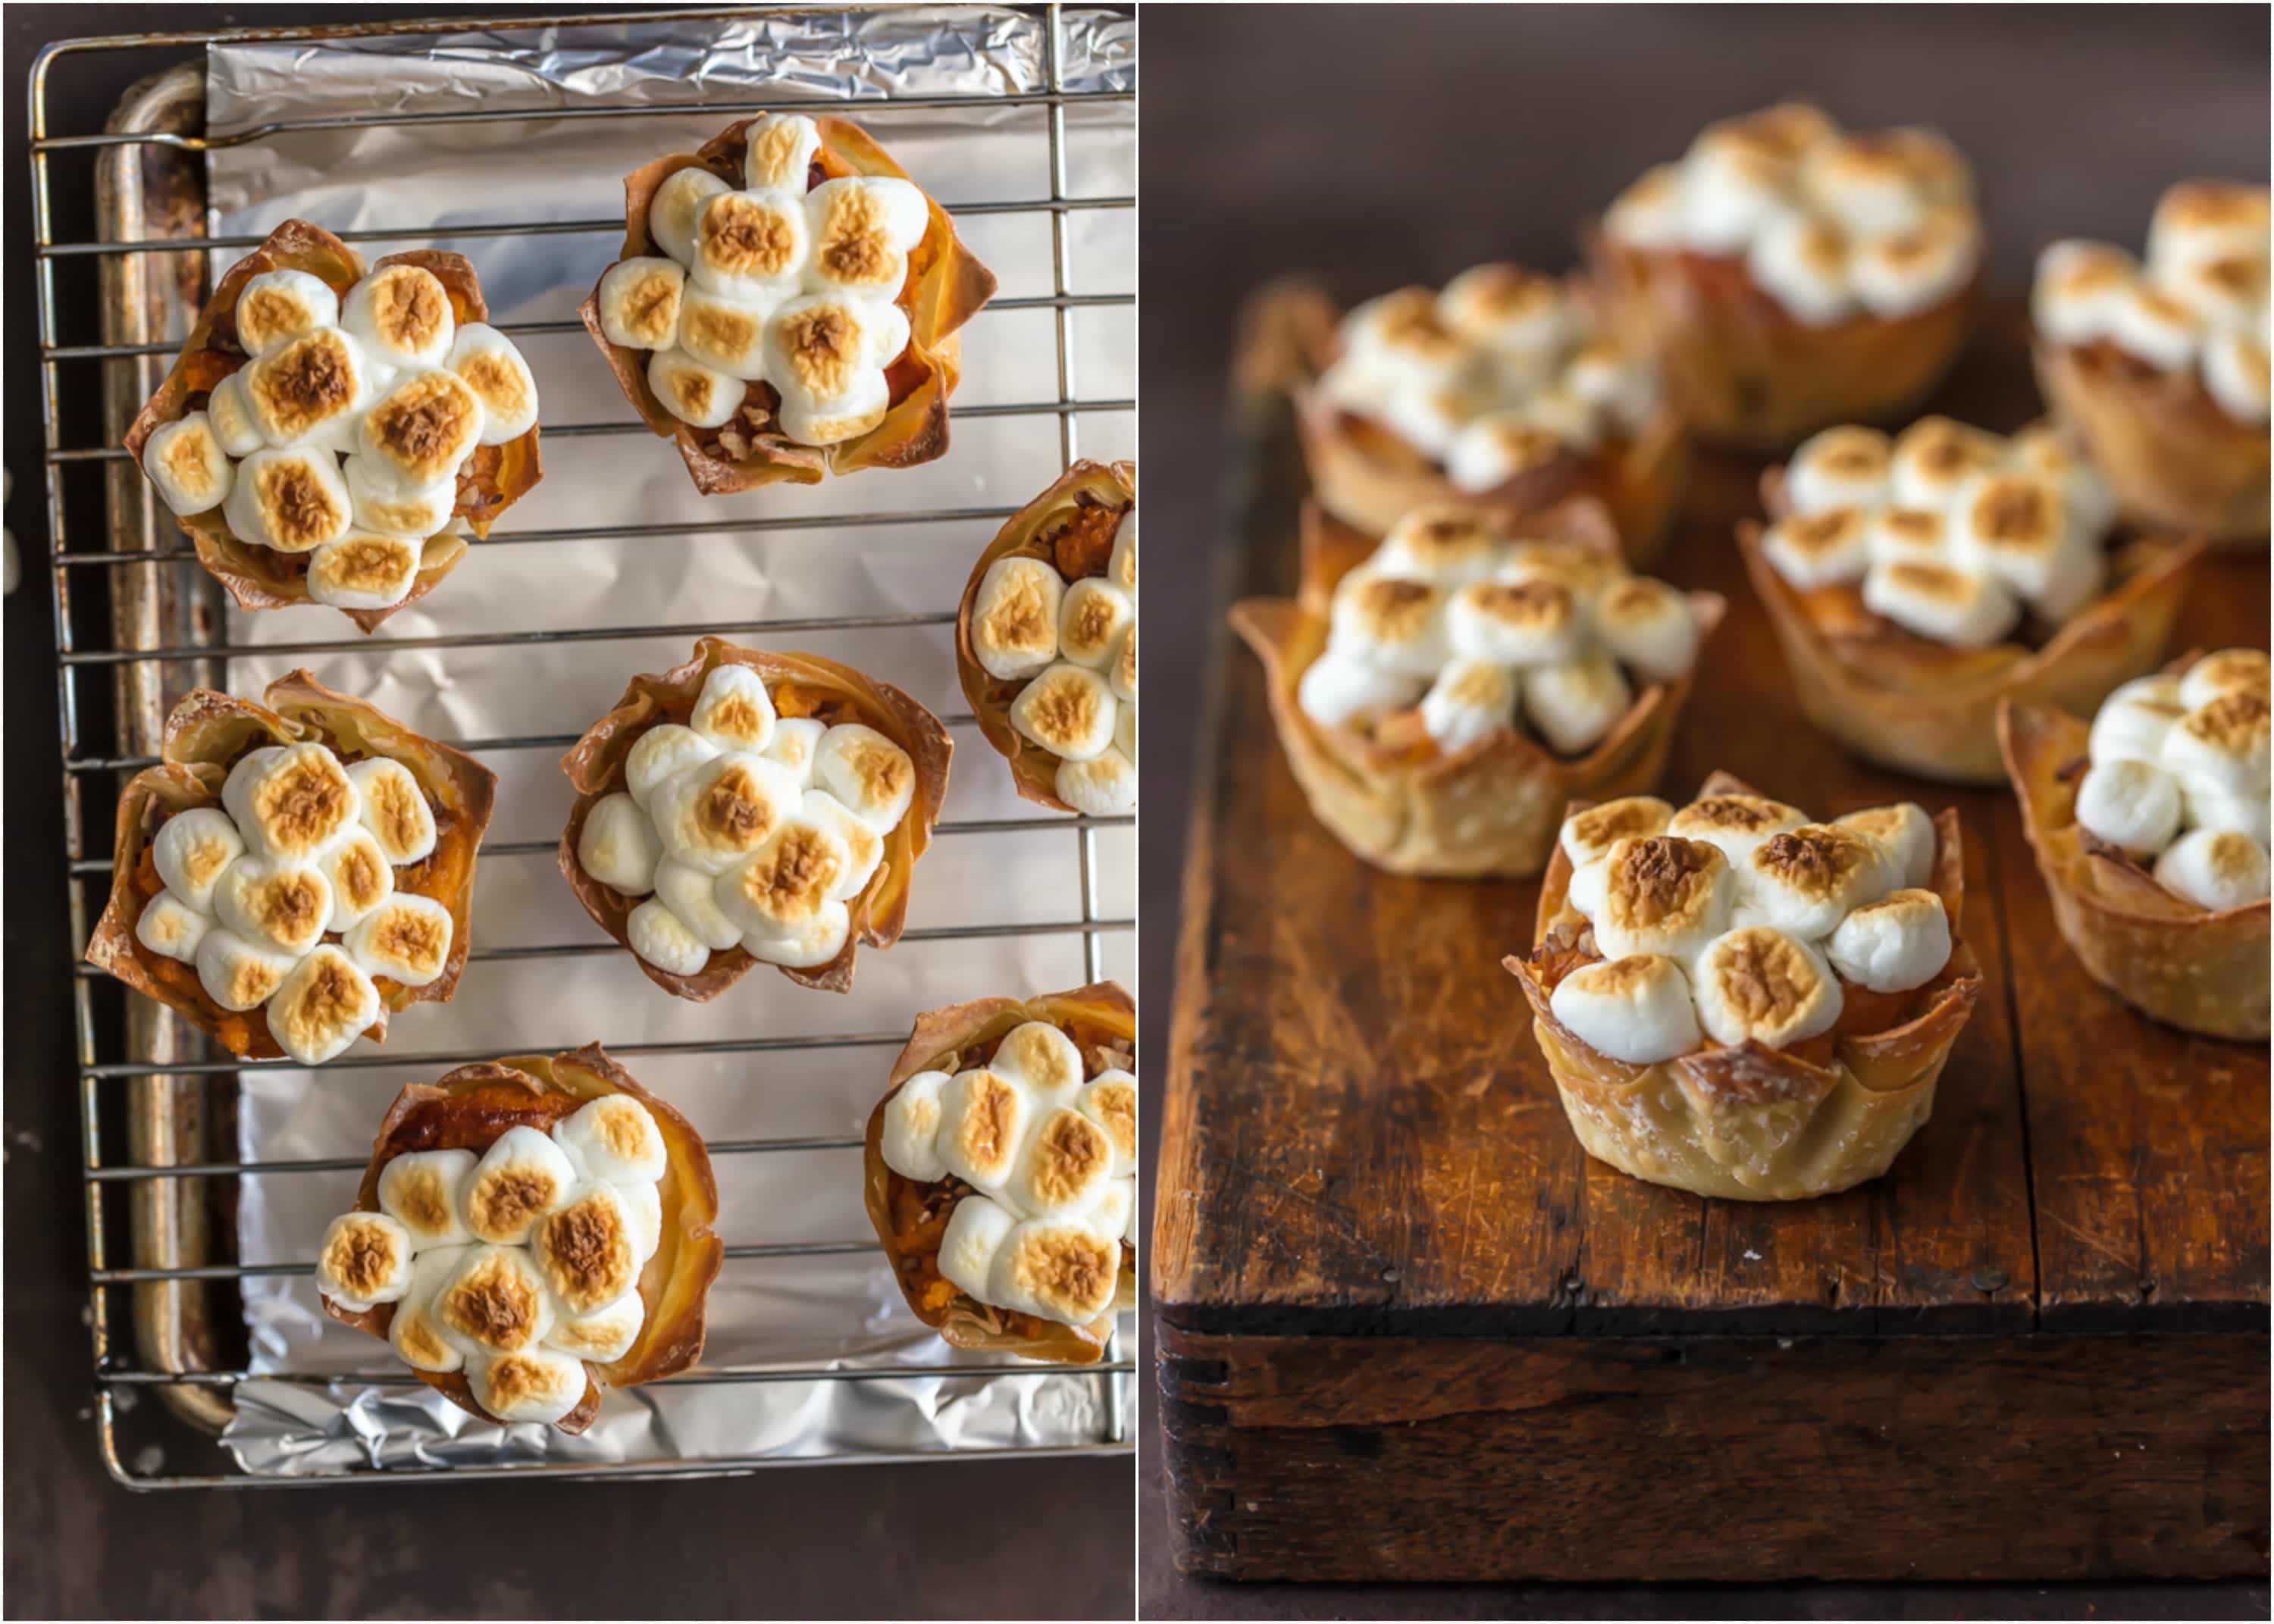 Wow your Thanksgiving guests with MINI SWEET POTATO SOUFFLE CUPS! It doesn't get cuter than wonton cups stuffed with sweet potato souffle and topped with toasted marshmallows.